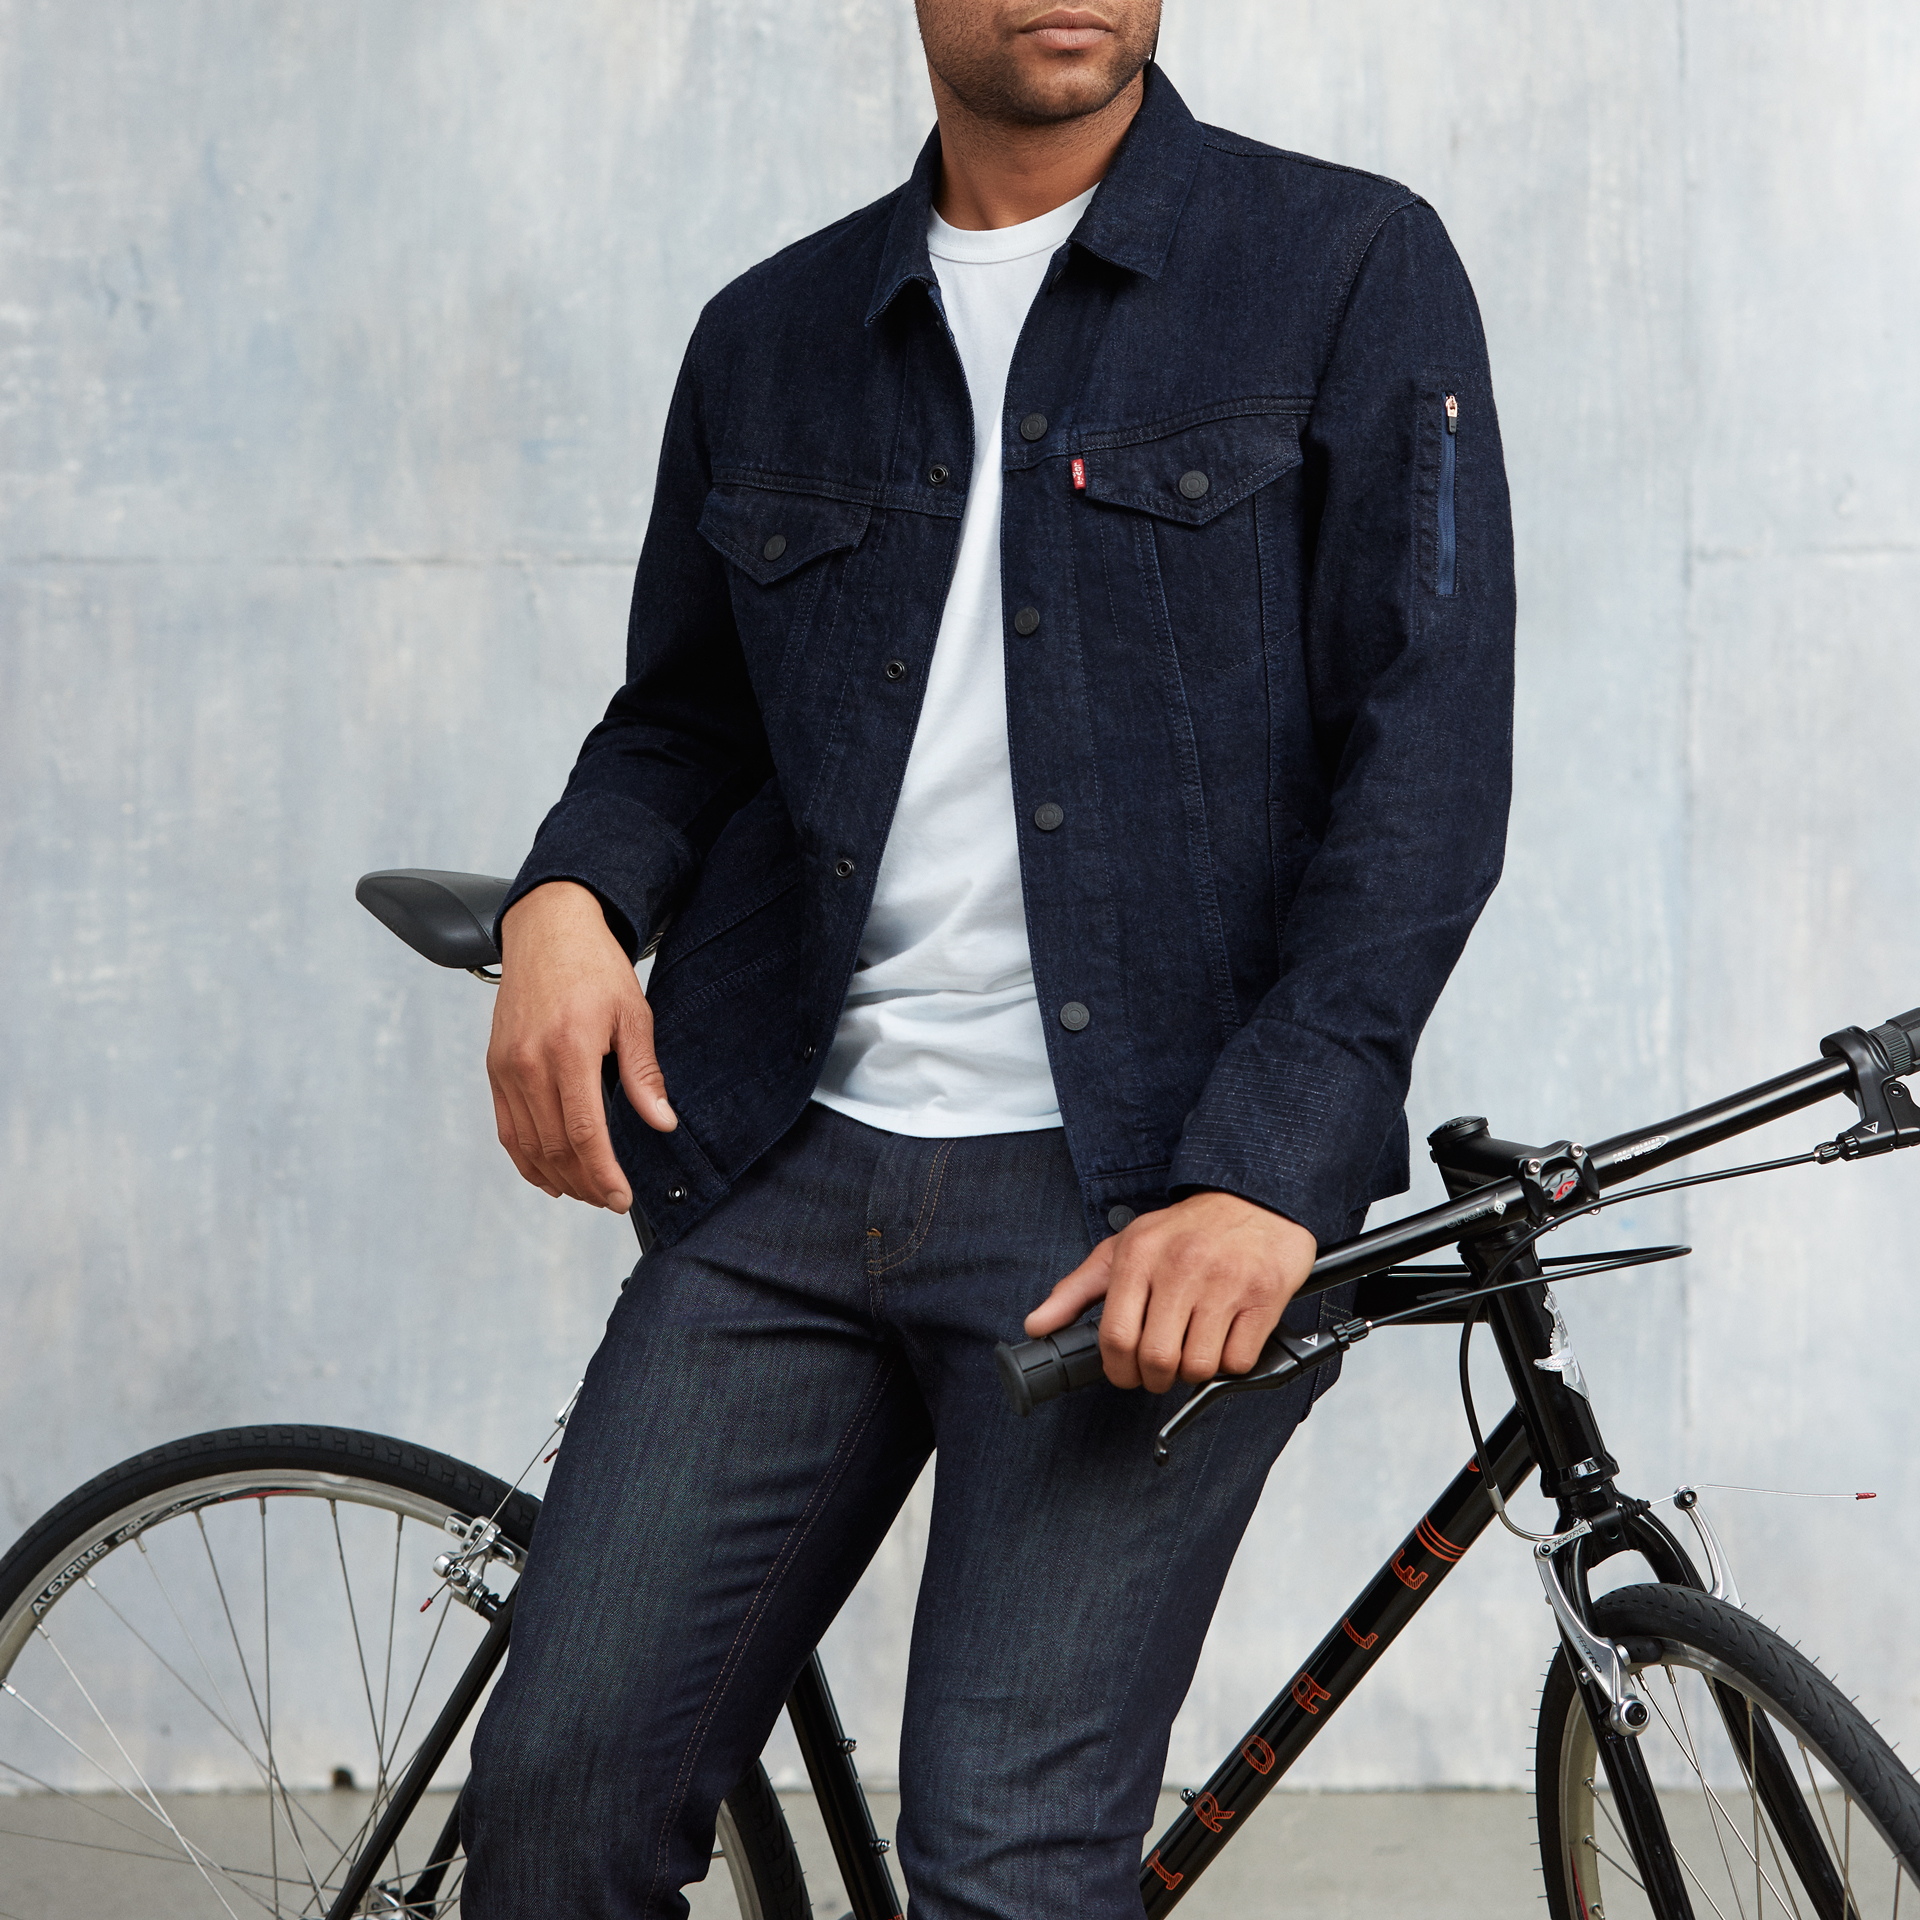 Levi’s new Bluetooth-connected jacket seems both cool and weird